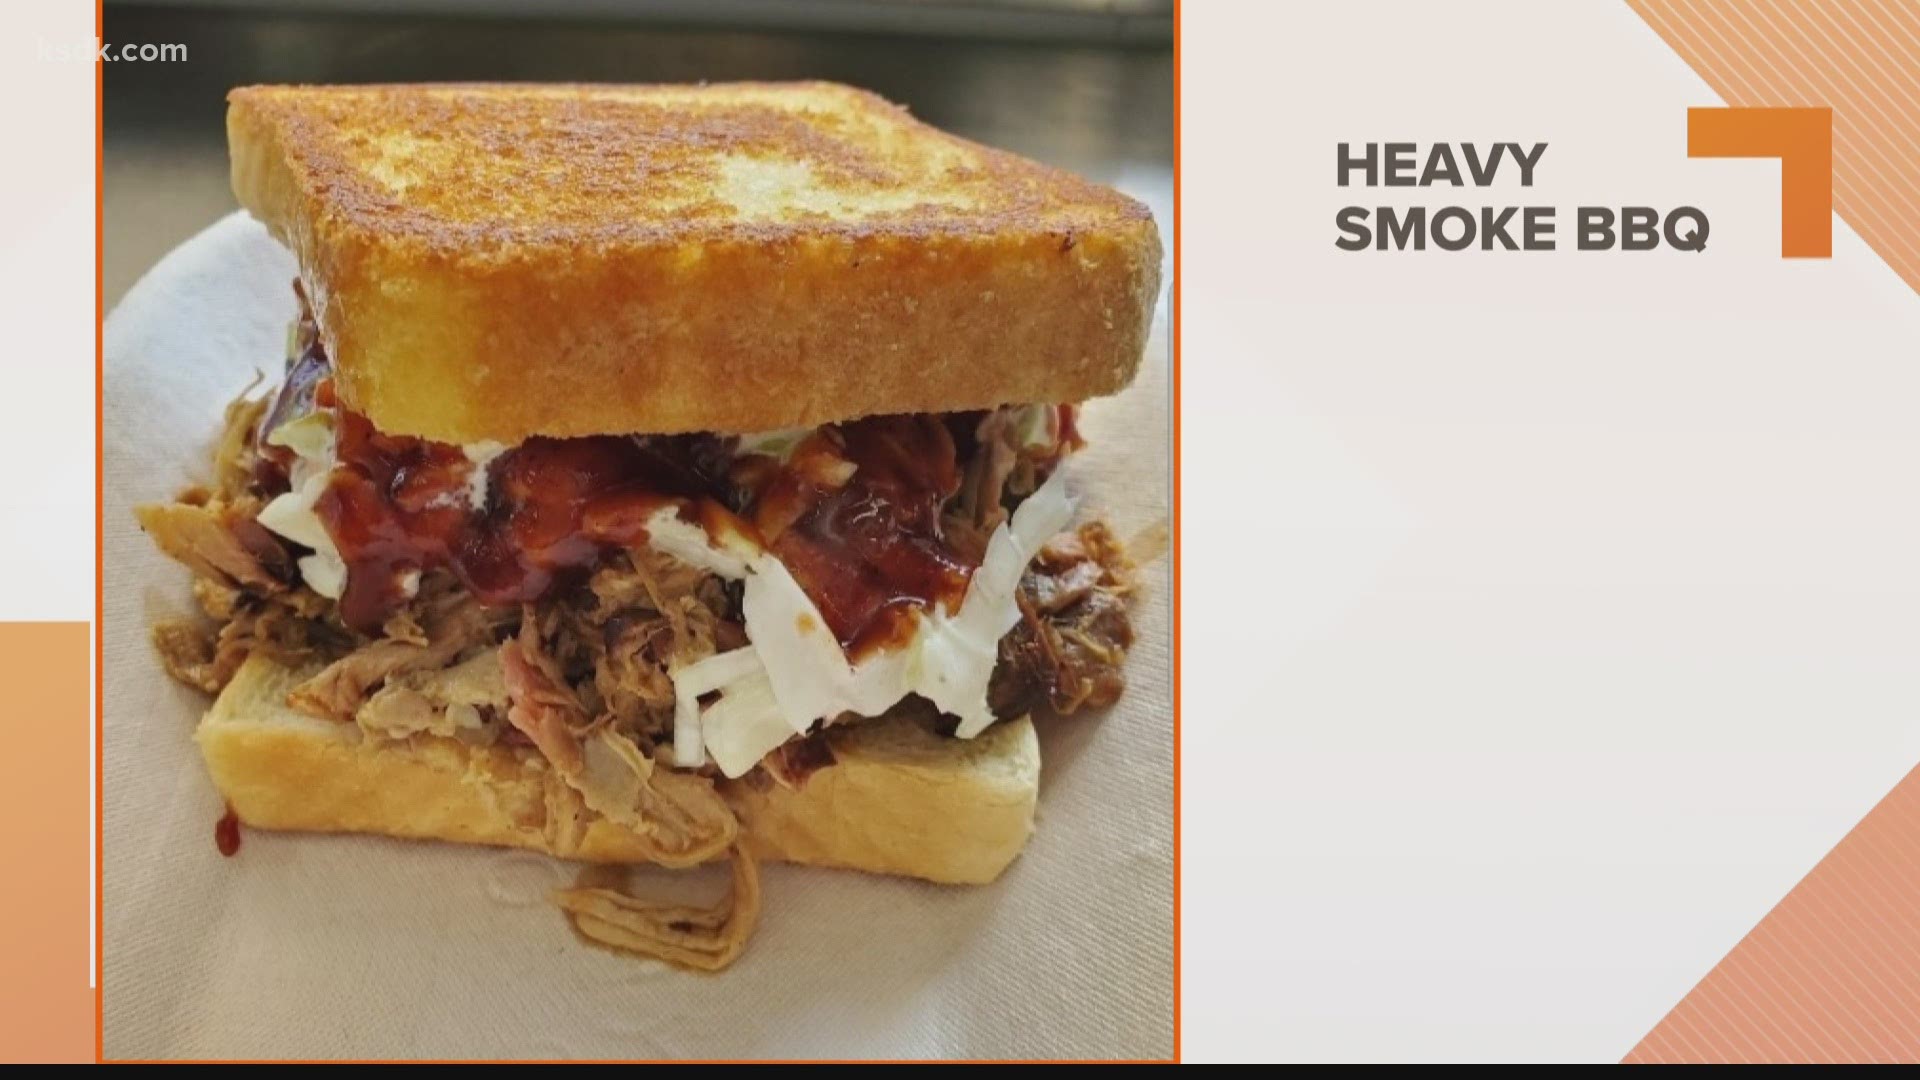 Heavy Smoke BBQ will open its brick-and-mortar on Nov. 6. at 11 a.m.